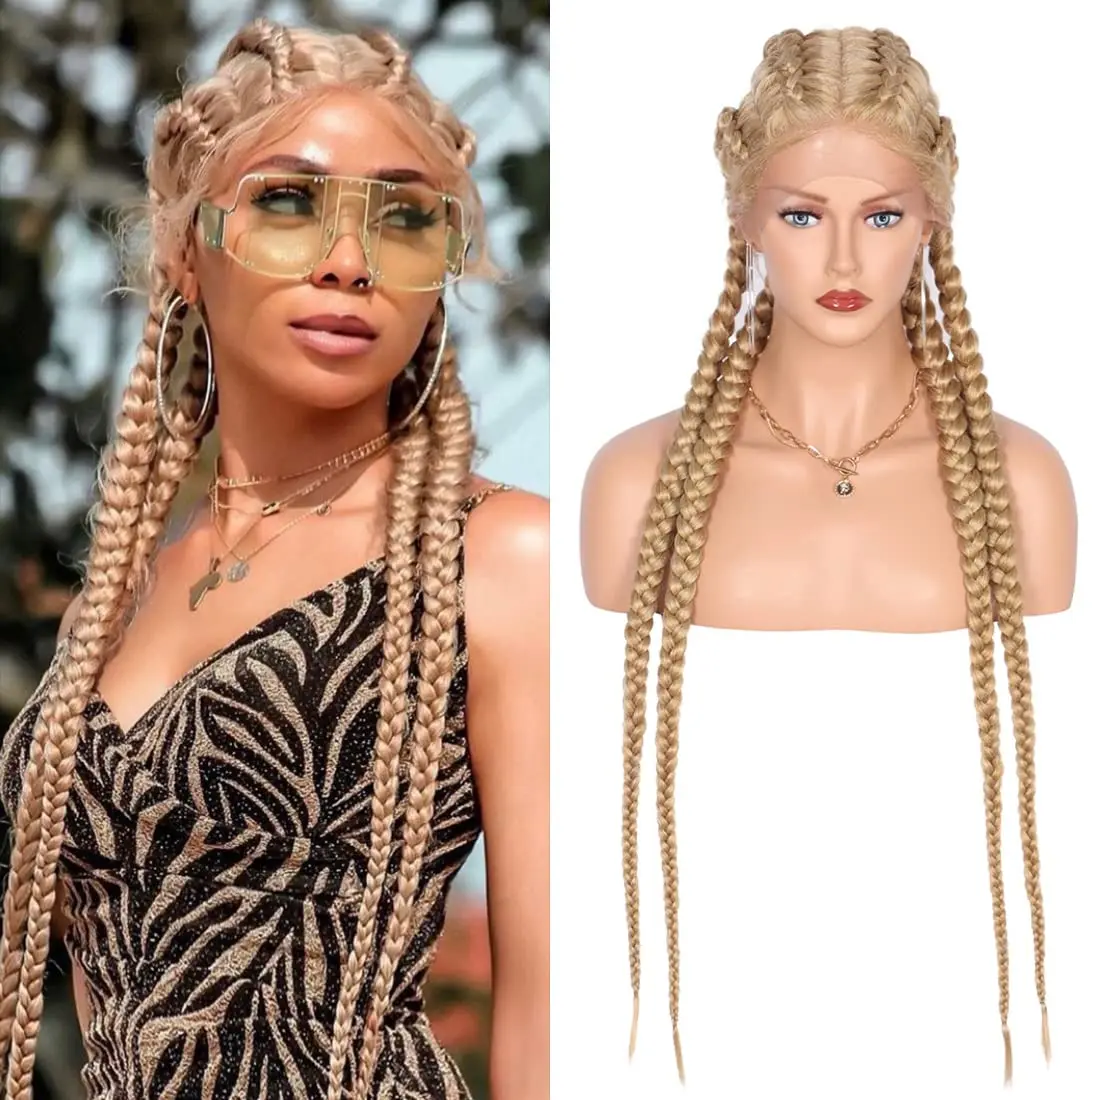 

Novelties Hand Braided Synthetic Lace Front Box Braided Wigs with 360 Swiss Lace Front Double Dutch Braid Wig For Black Woman, #1b #27/613mb #1/27t #1/30t #1/99jt